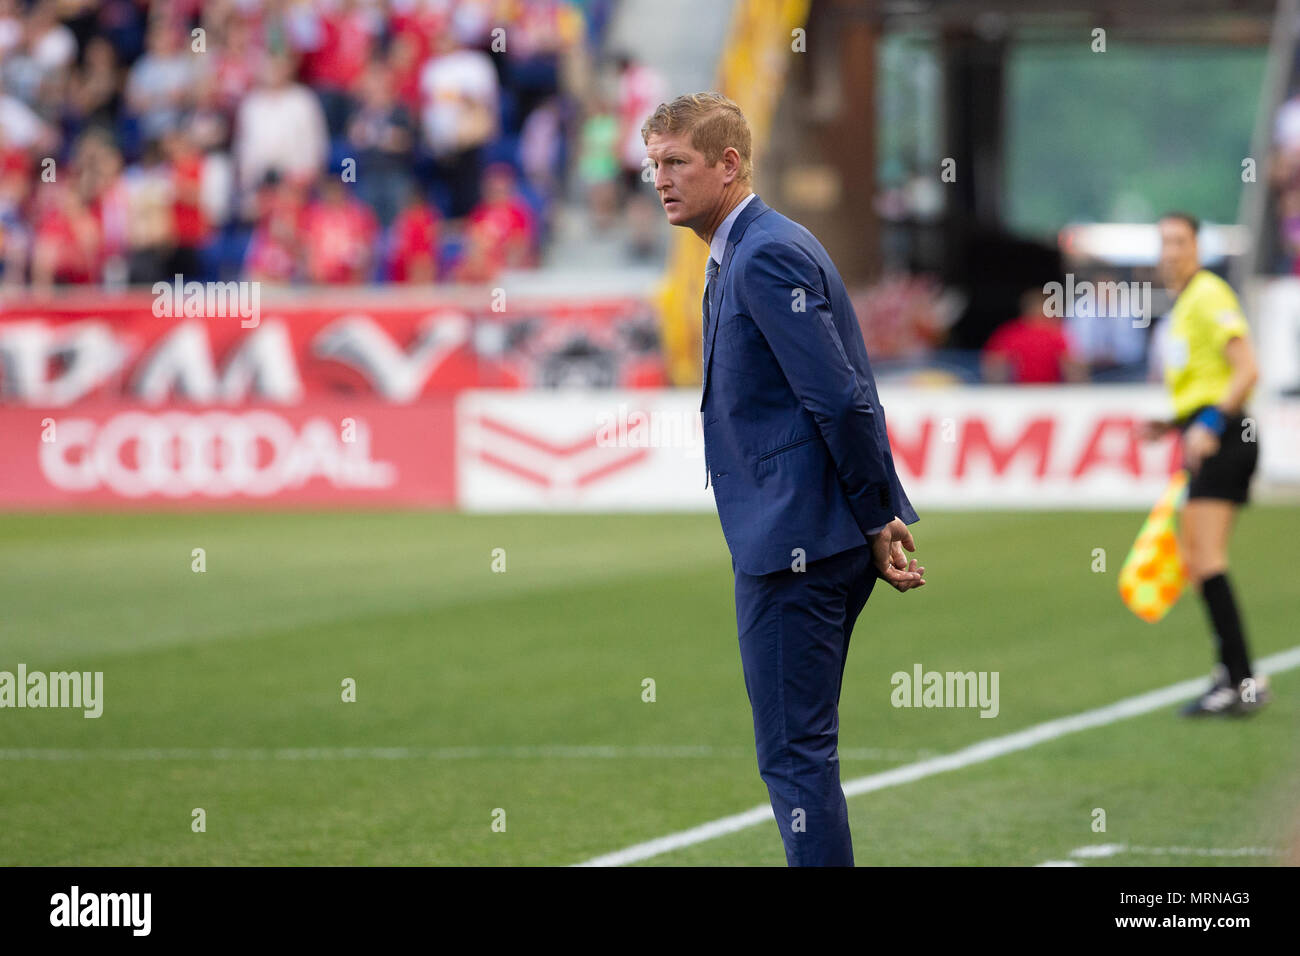 Harrison, NJ - May 26, 2018: Philadelphia Union coach Jim Curtin watches game from pitch side during regular MLS game against New York Red Bulls at Red Bull Arena Game ended in draw 0 - 0 Credit: lev radin/Alamy Live News Stock Photo